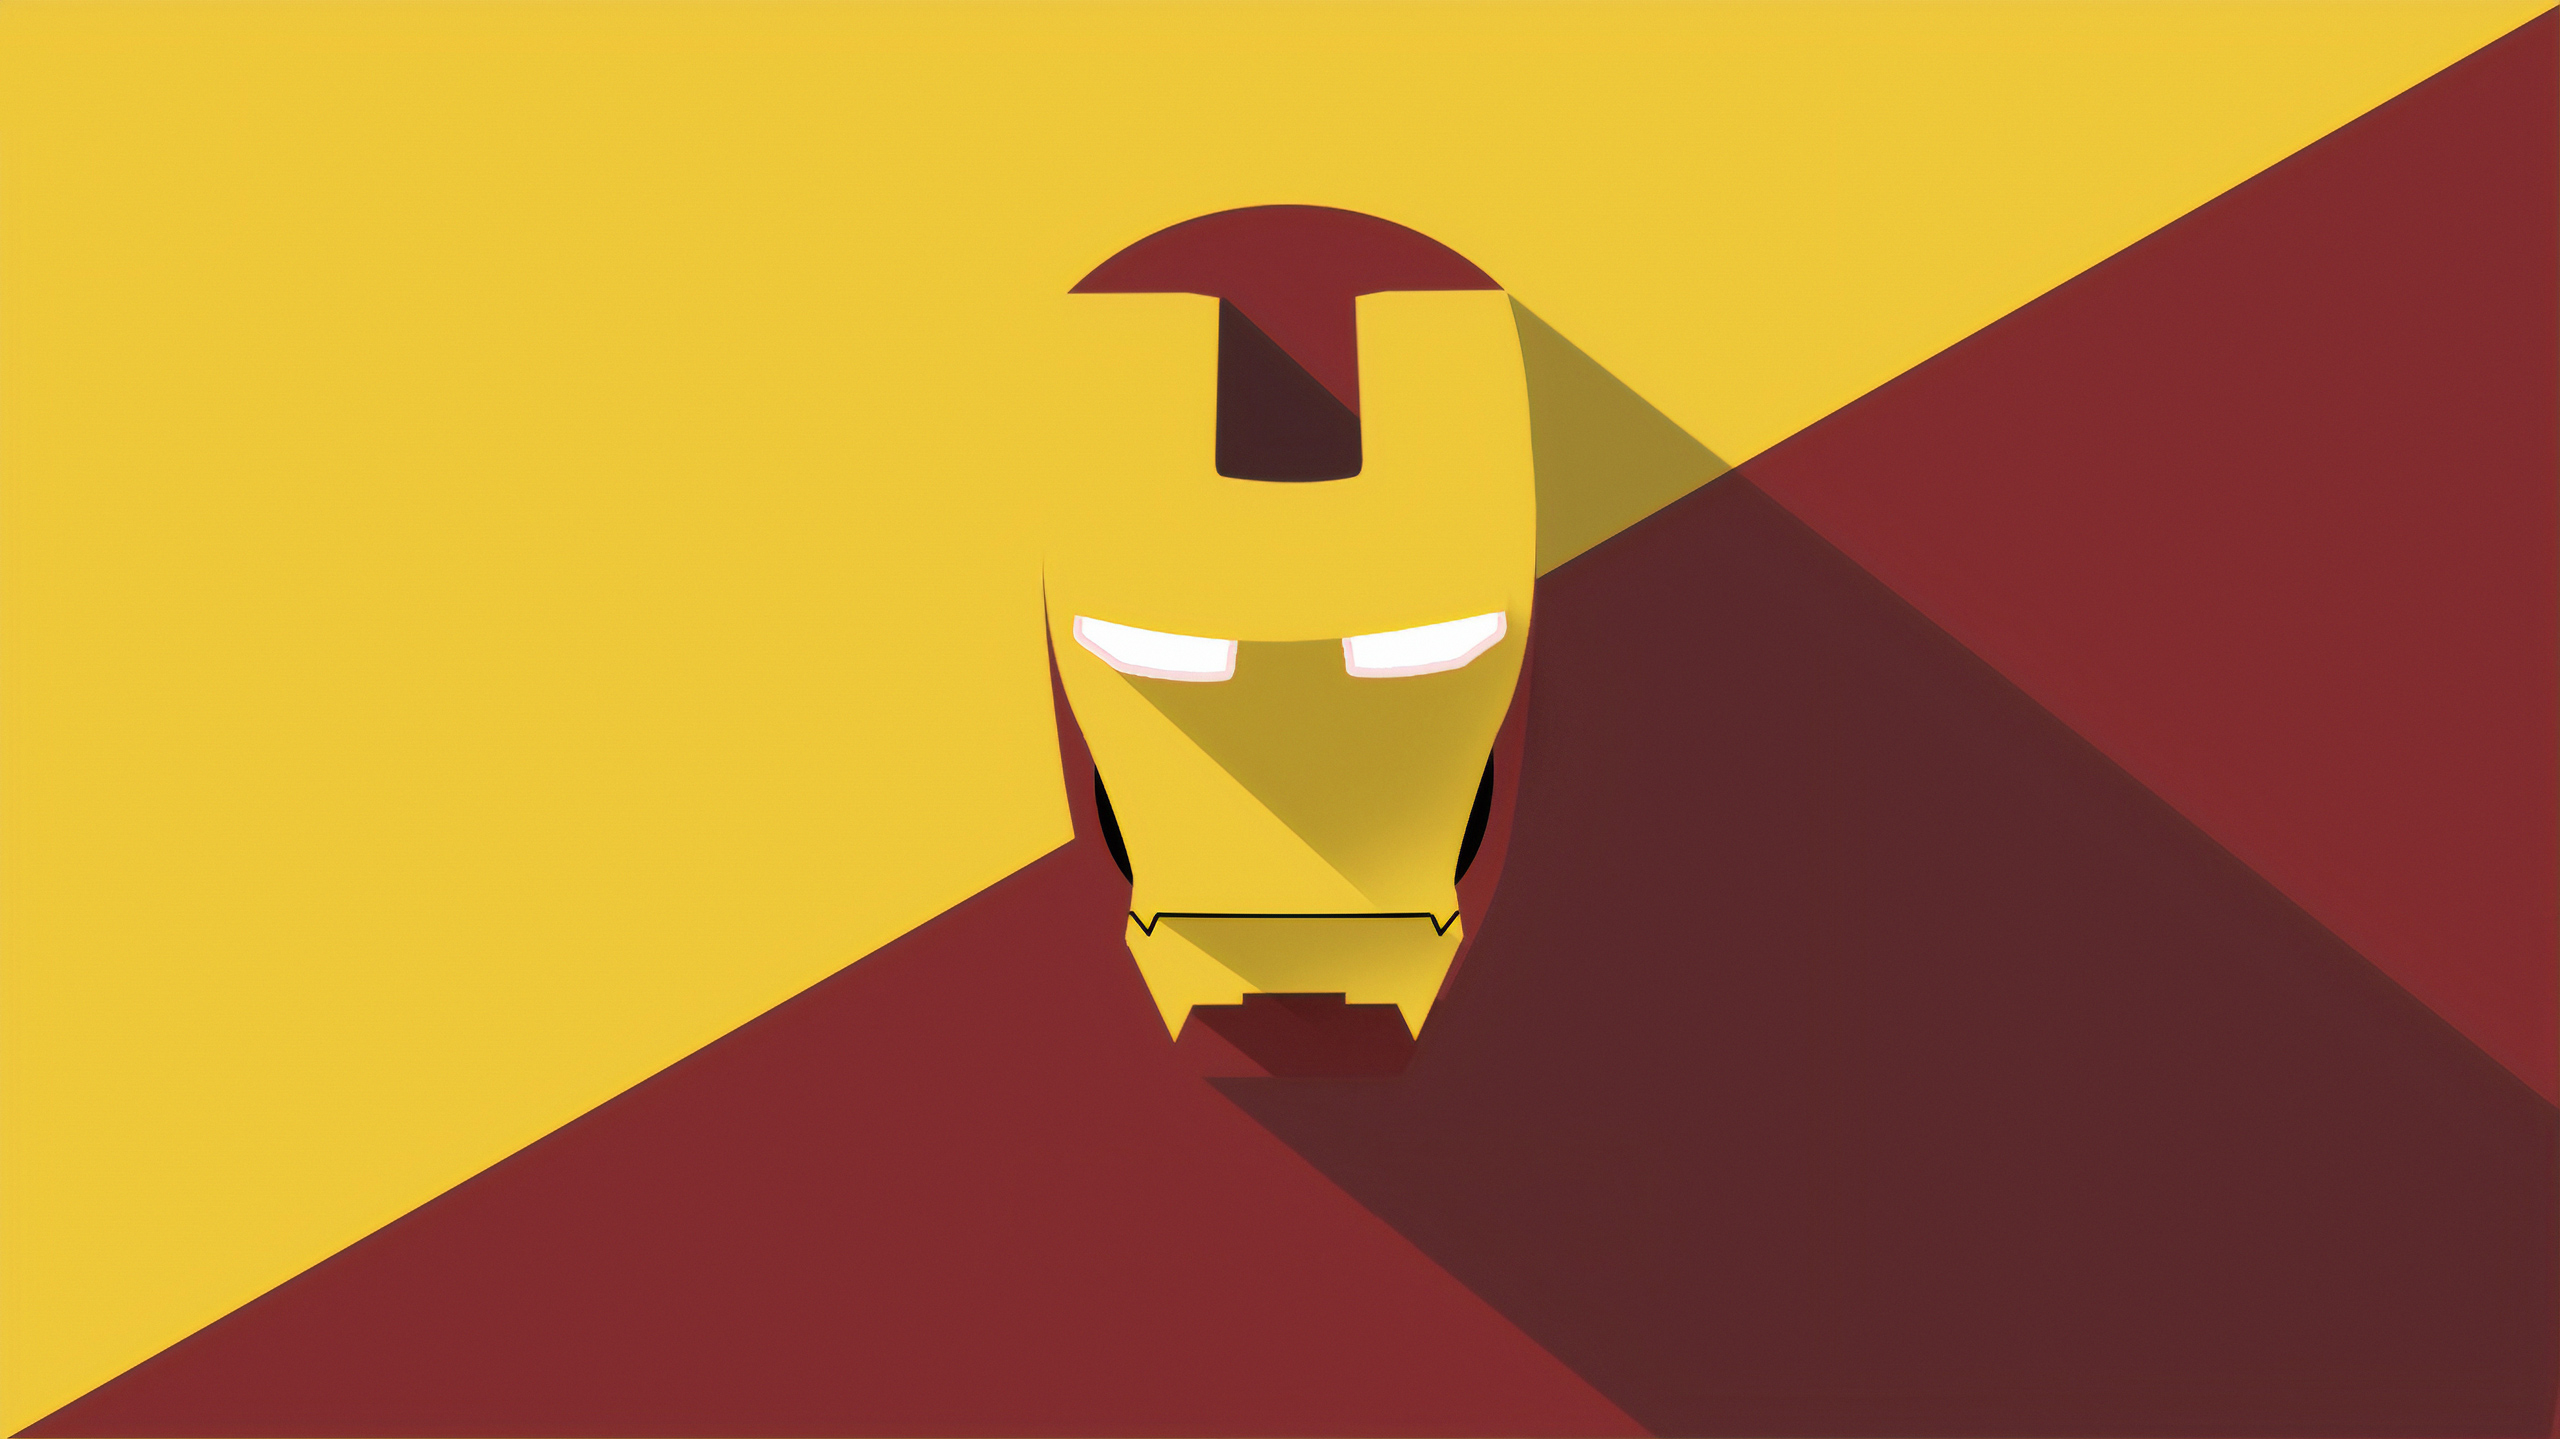 19x Iron Man Mask Minimal 19x Resolution Wallpaper Hd Minimalist 4k Wallpapers Images Photos And Background Wallpapers Den